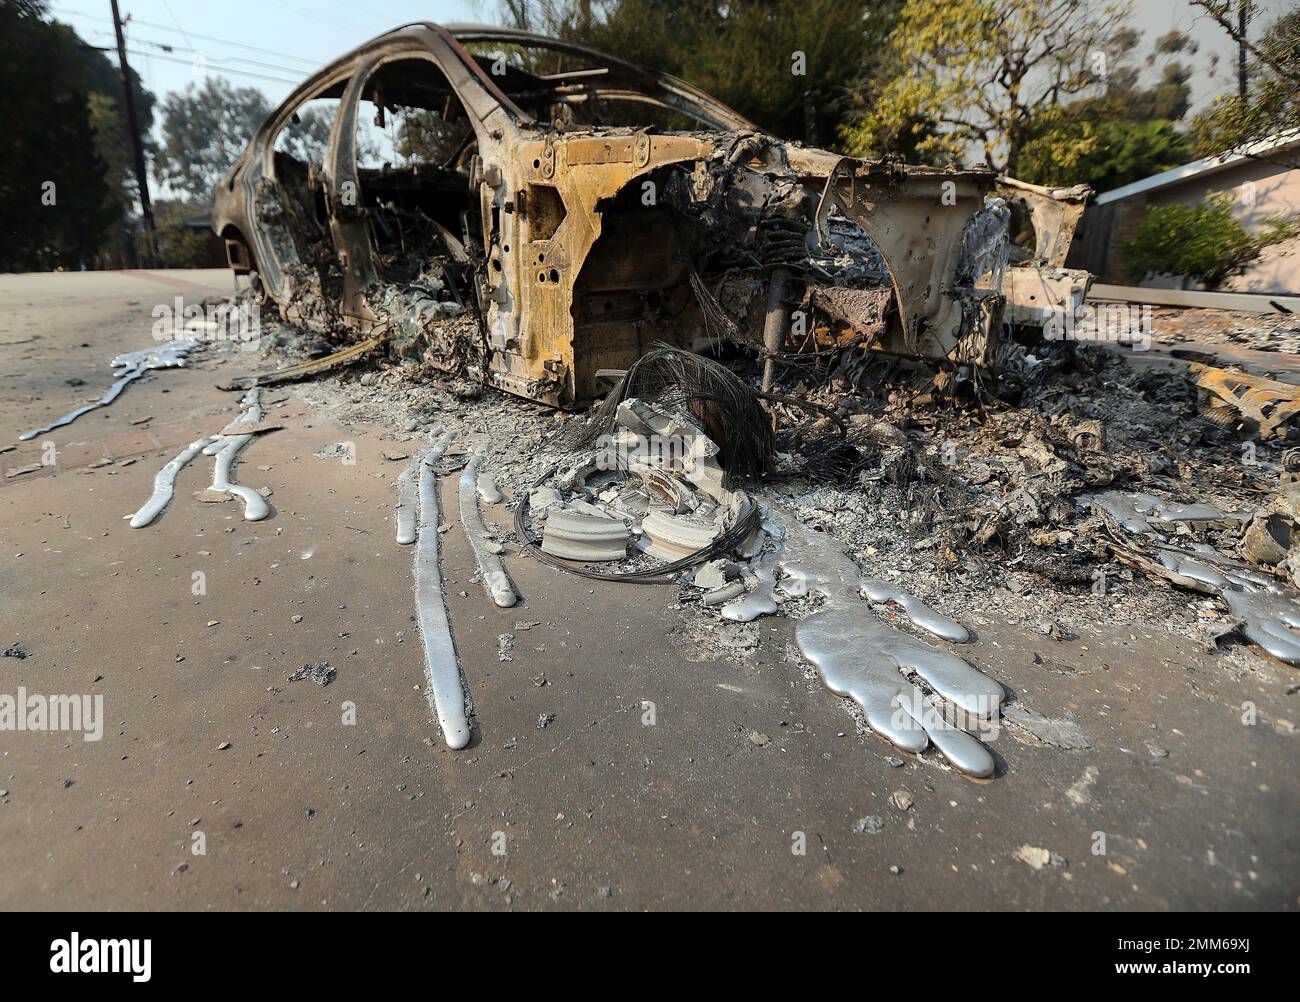 Molten aluminum has flowed from a car that burned in front of one of at least 20 homes destroyed just on Windermere Drive in the Point Dume area of Malibu, Calif., Saturday, Nov. 10, 2018. Known as the Woolsey Fire, it has consumed thousands of acres and destroyed dozens of homes. (AP Photo/Reed Saxon) Stock Photo